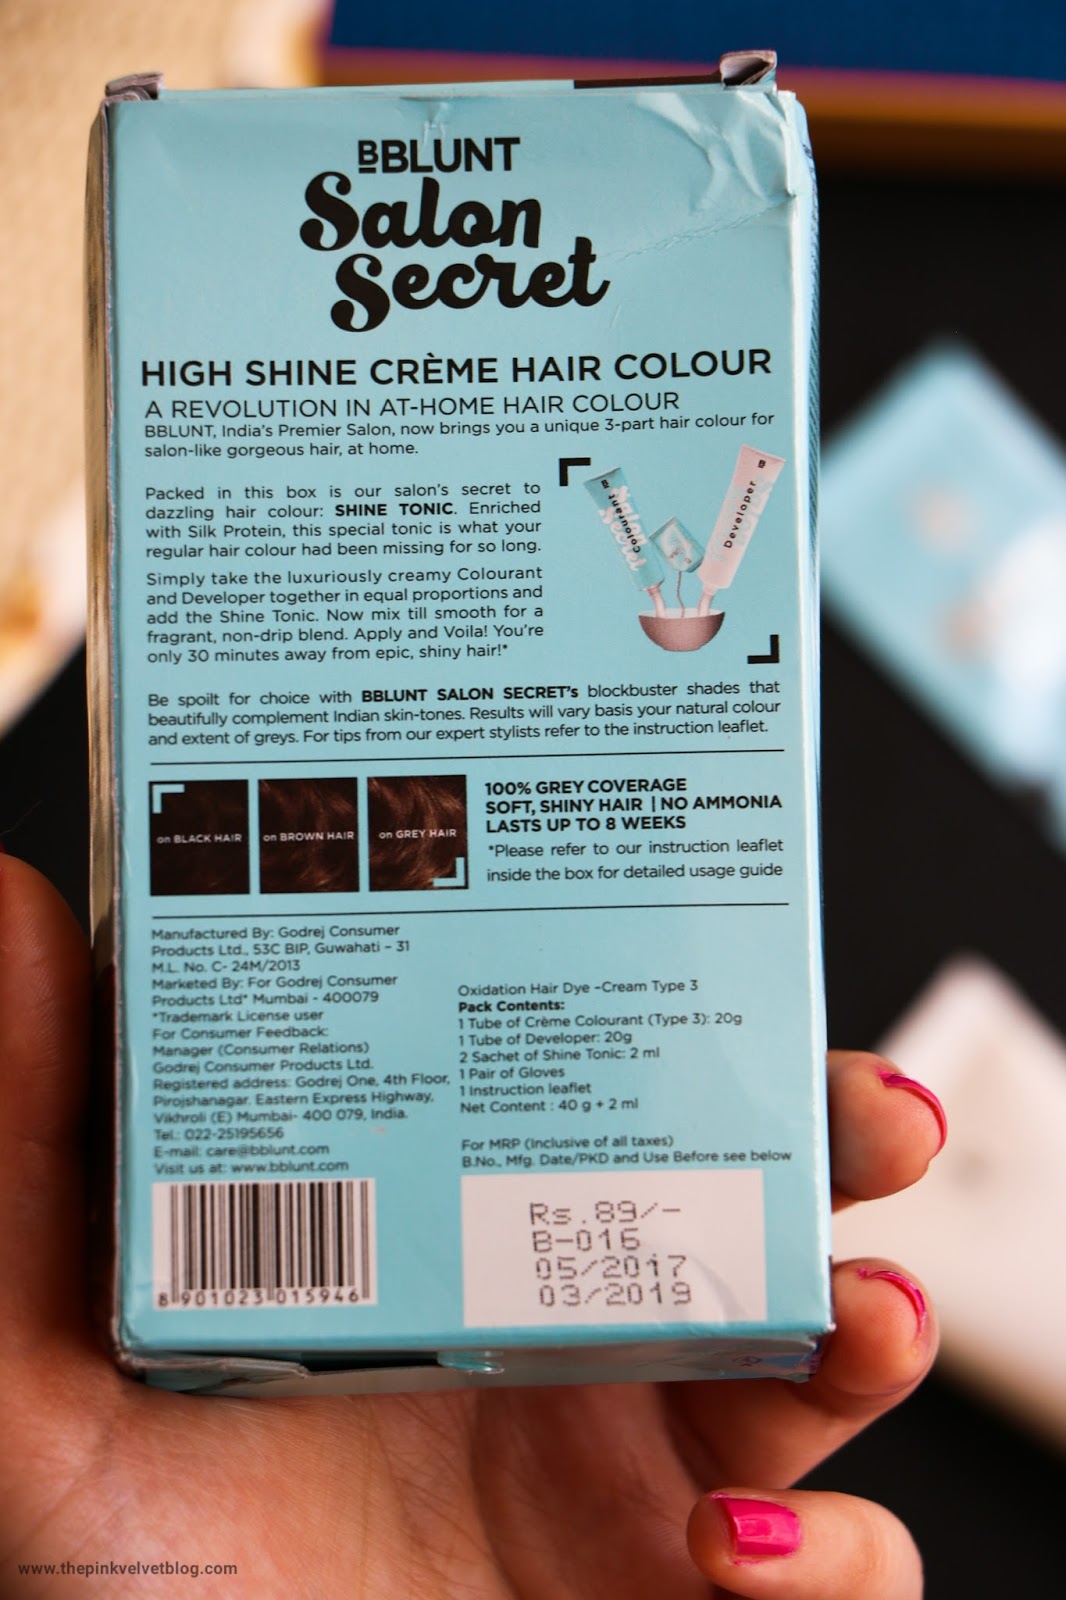 My Experience With BBLUNT Salon Secret High Shine Creme Hair Color -  Chocolate Dark Brown 3 - The Pink Velvet Blog